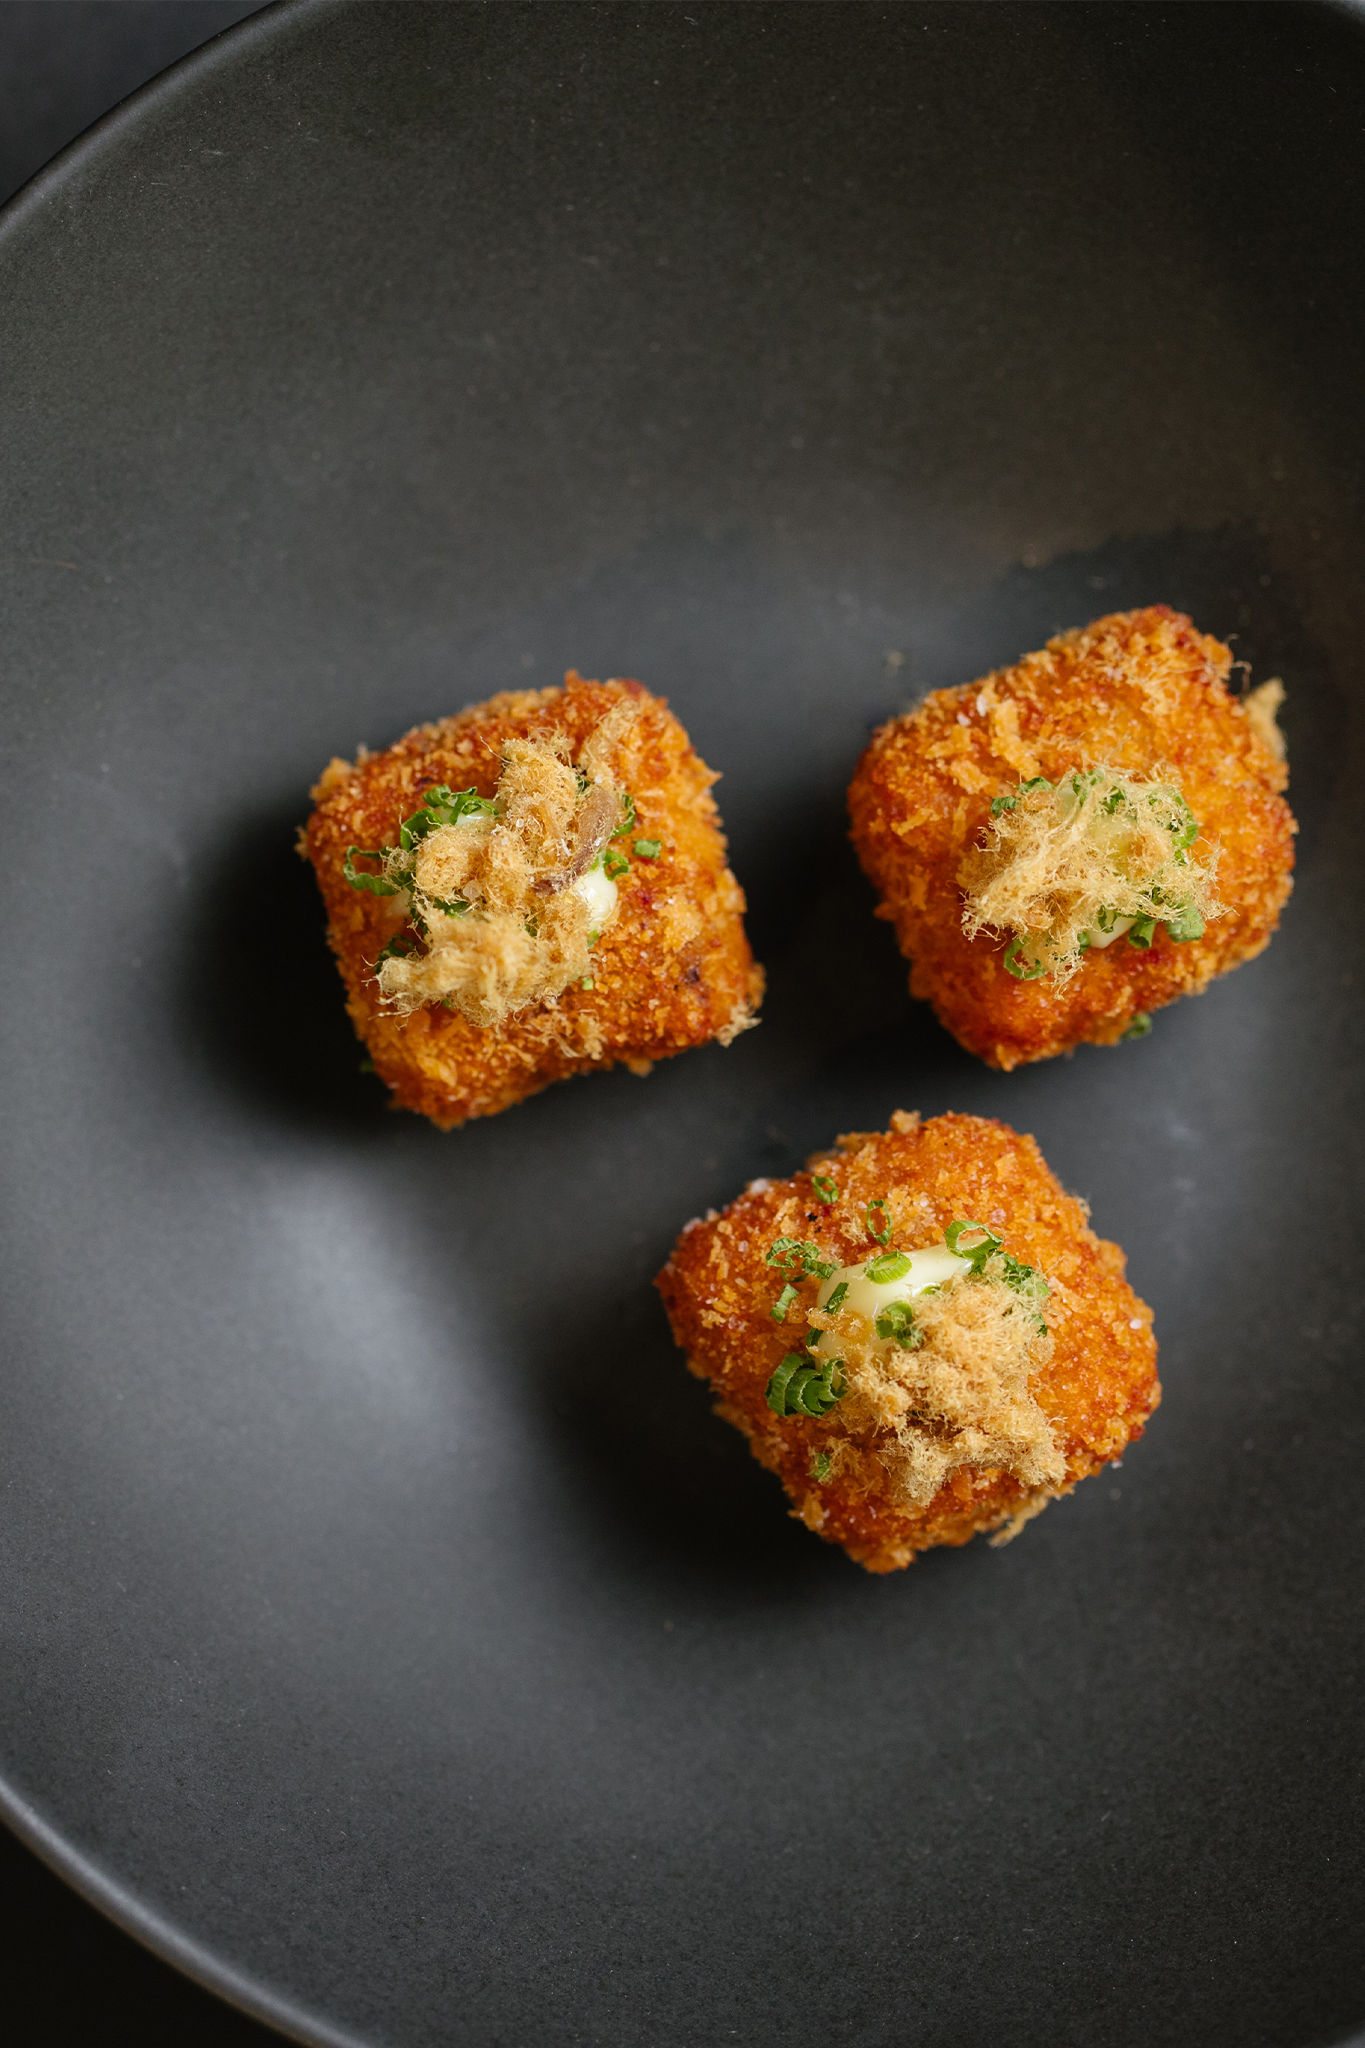 Three small golden brown croquettes on a black plate with a green garnish